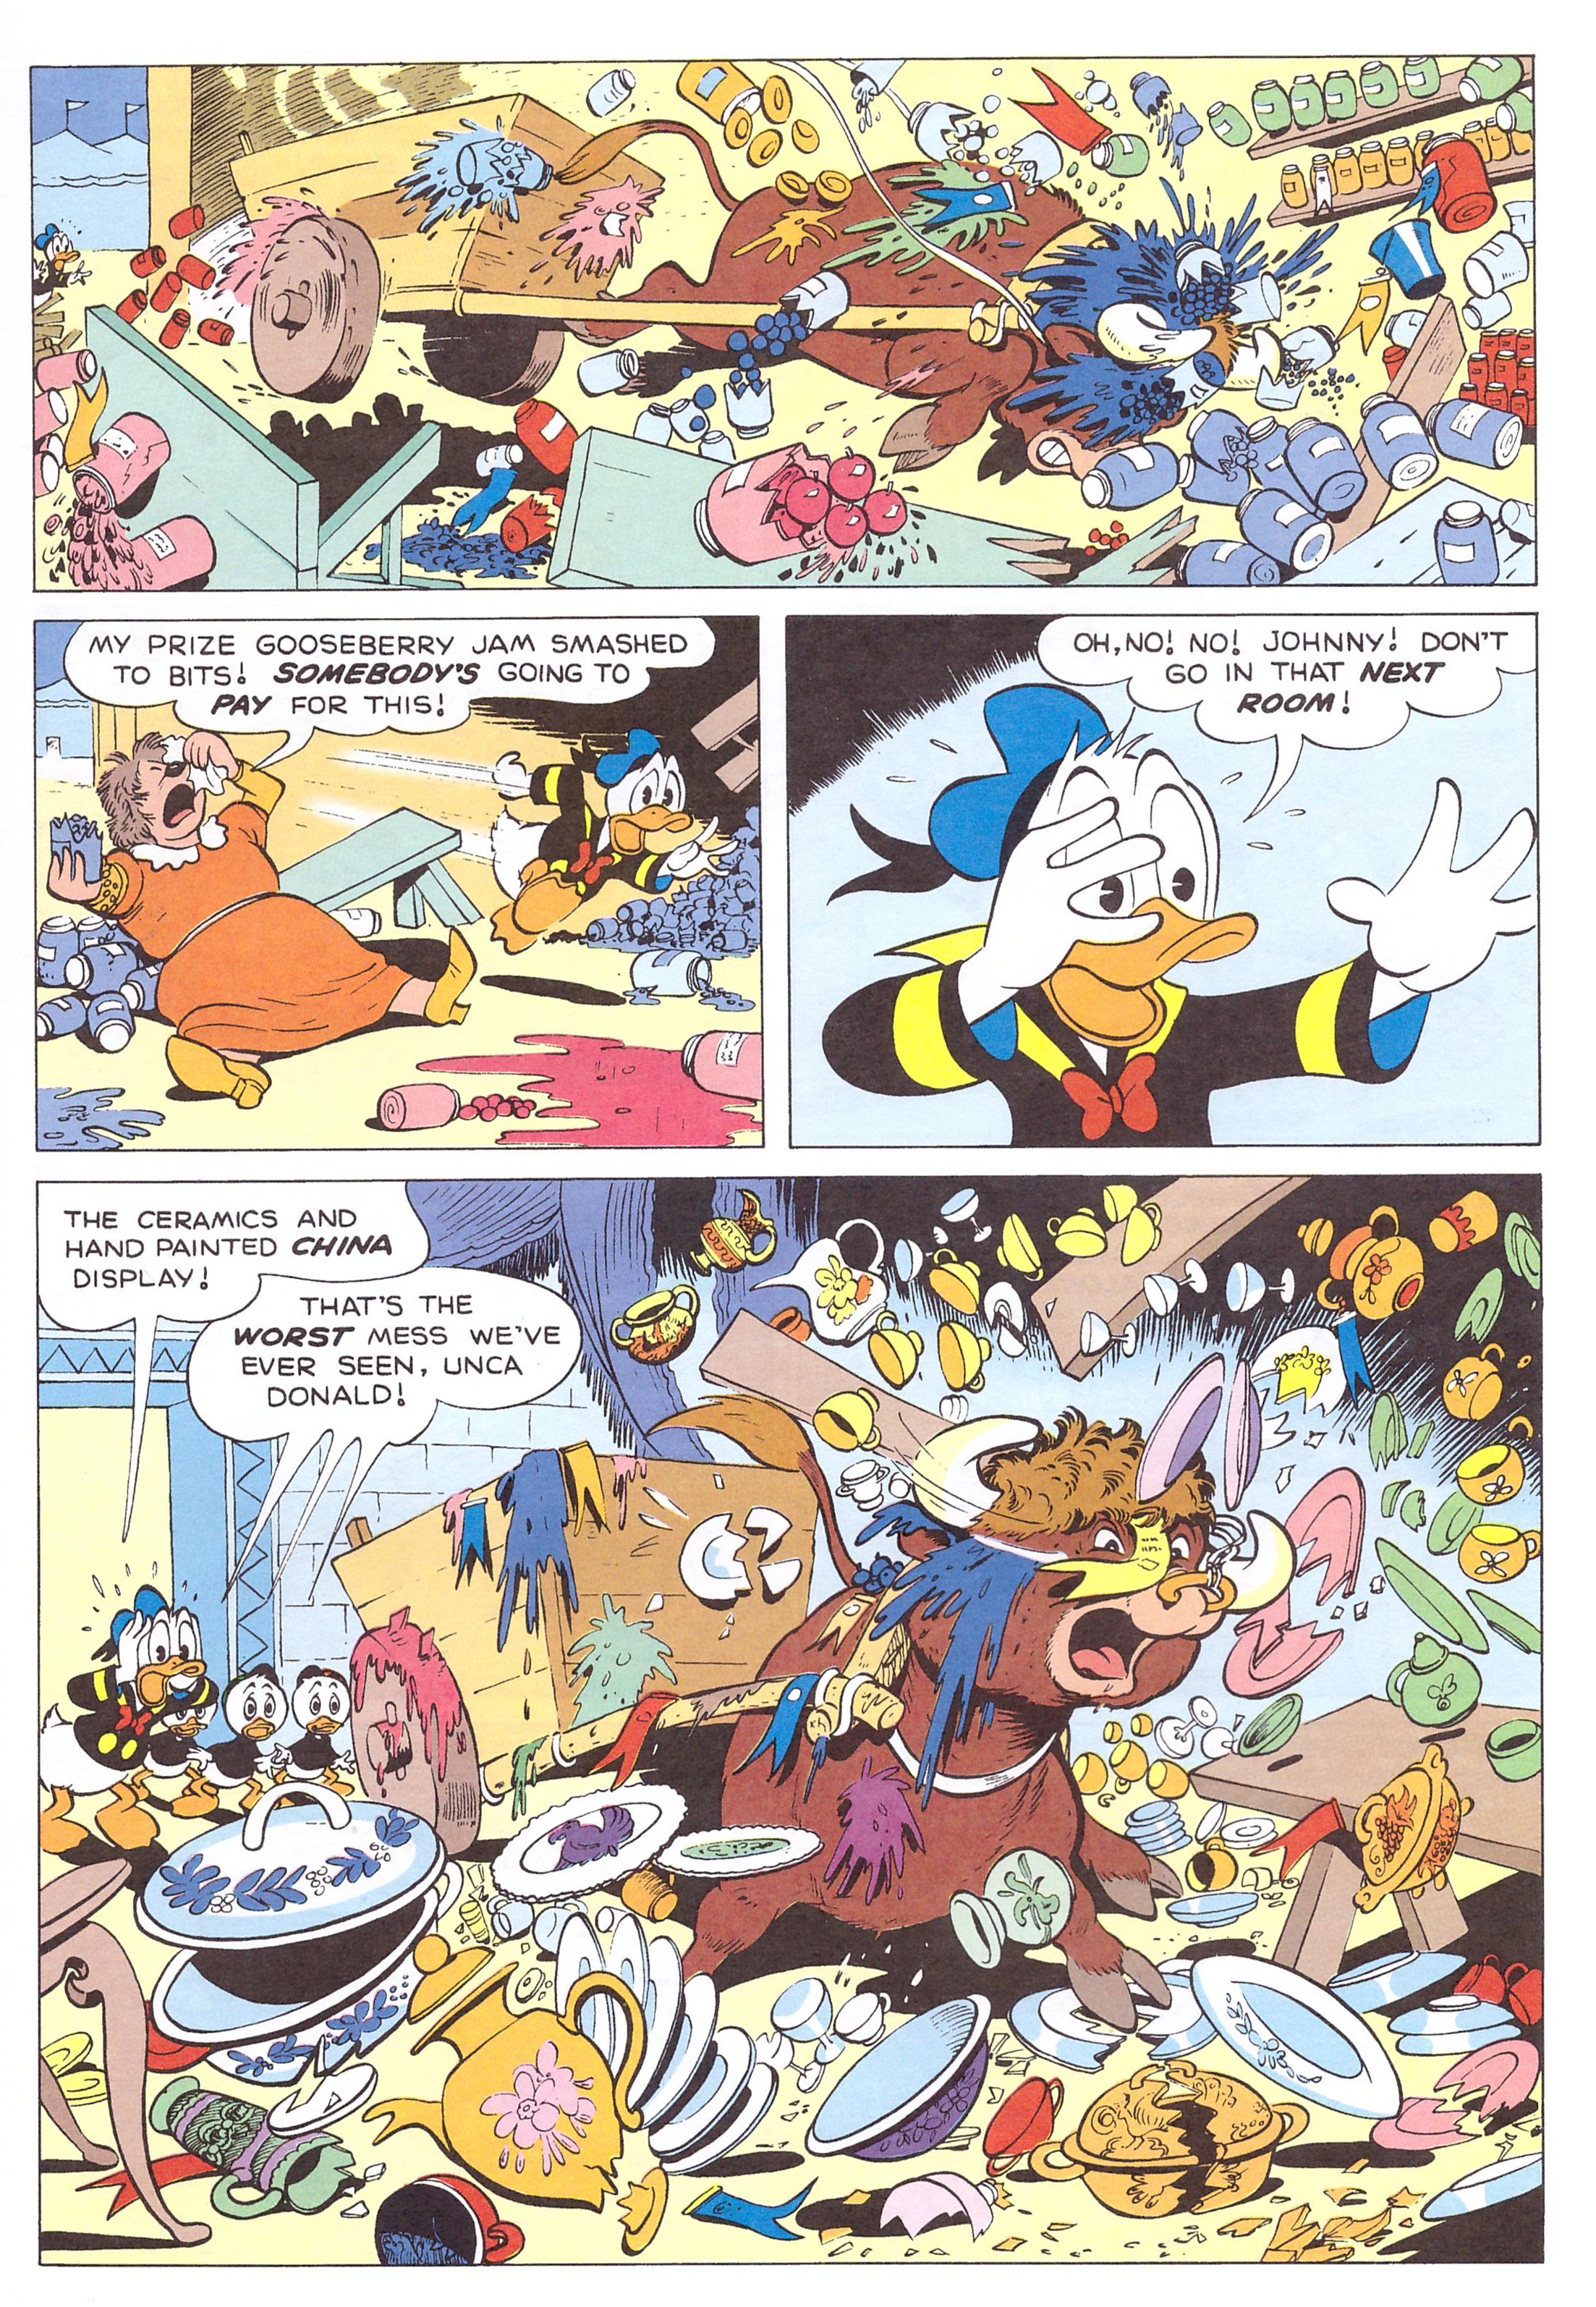 Walt Disney Comics and Stories by Carl Barks 29 review